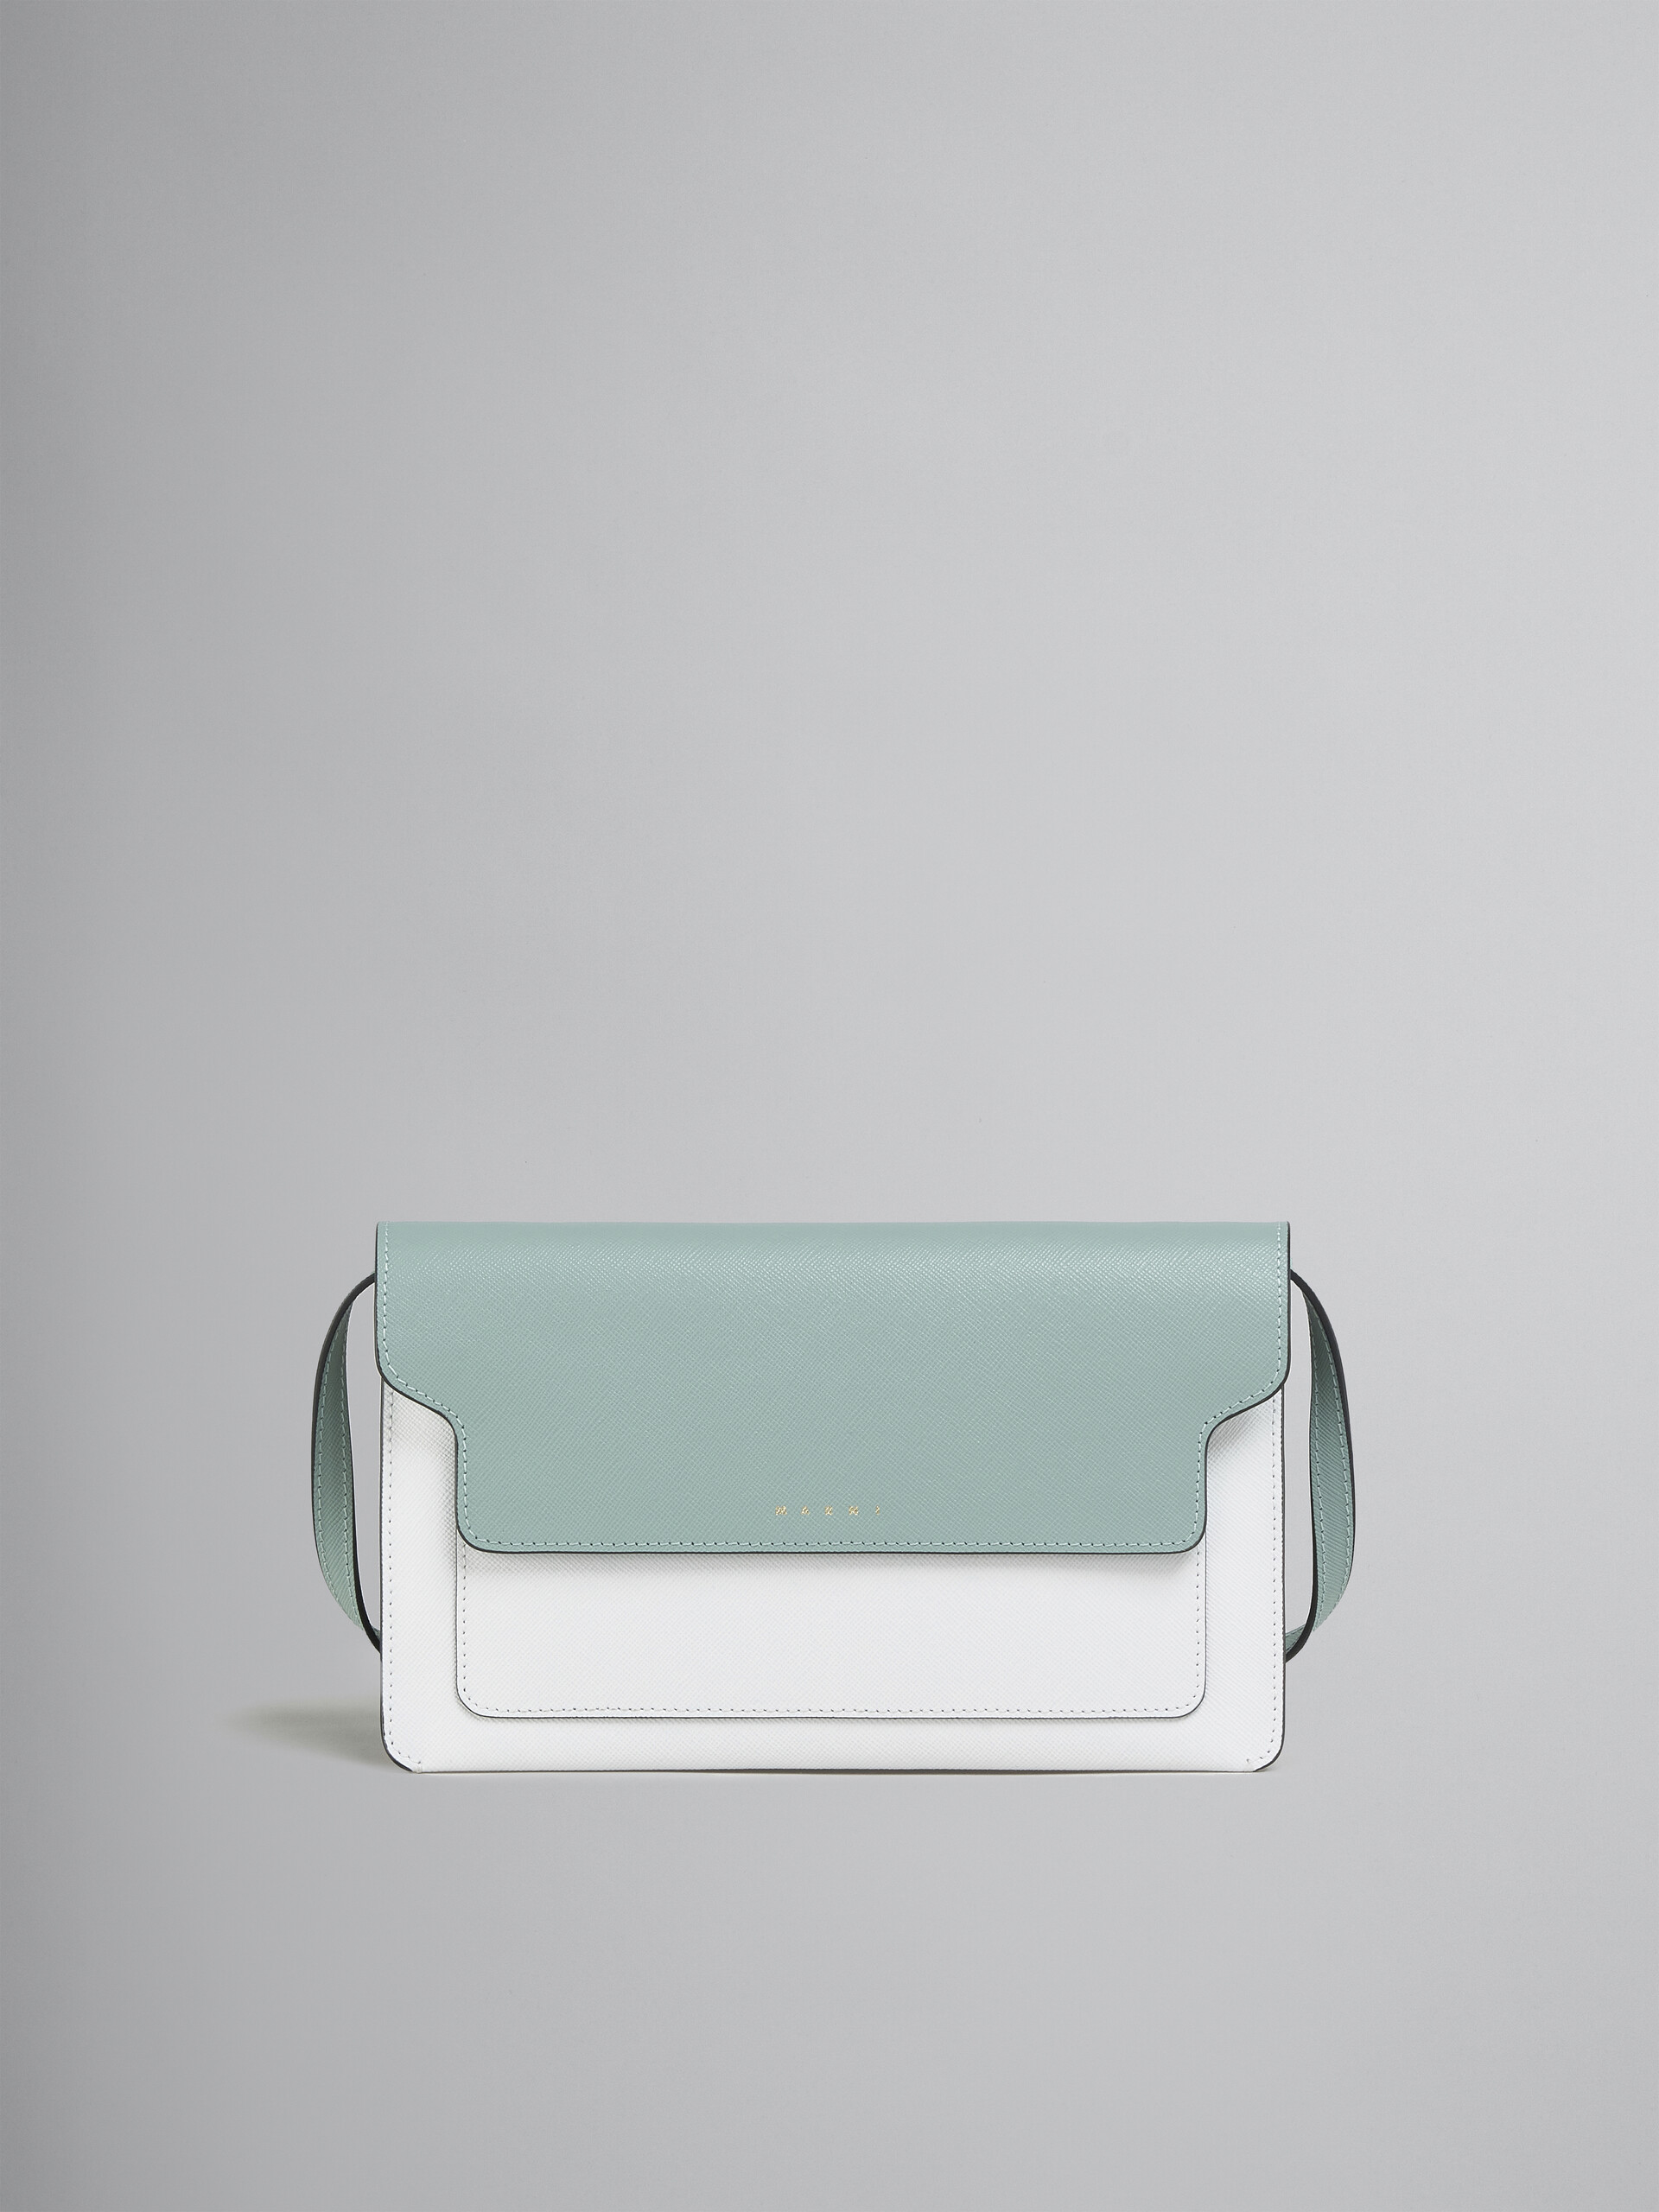 Trunk Clutch in light green white and brown saffiano leather - Pochettes - Image 1